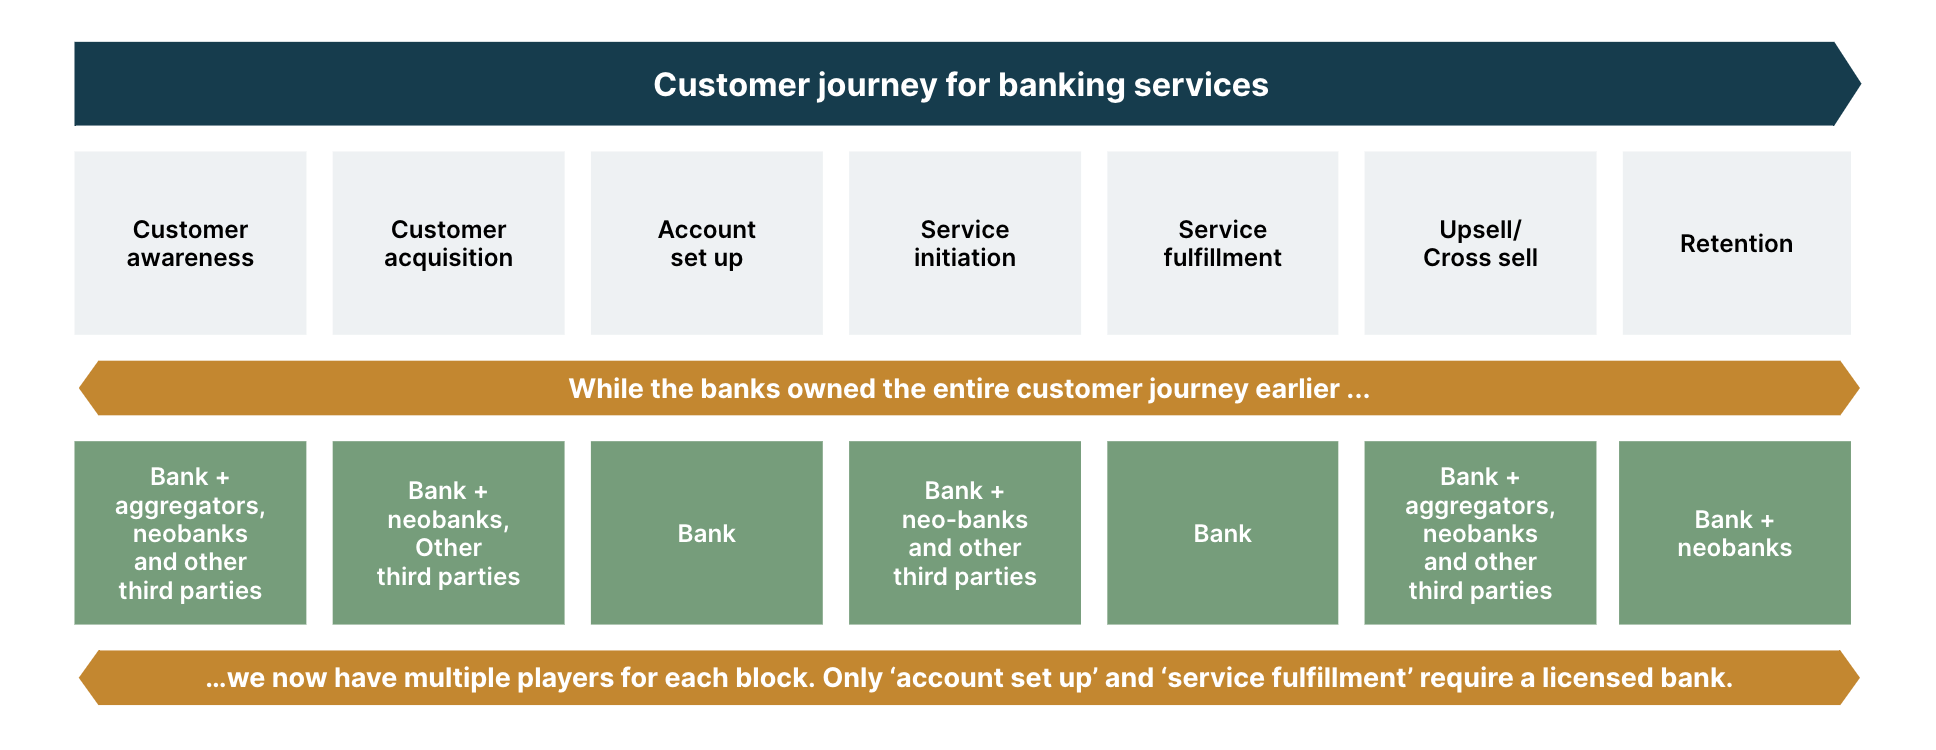 banks owned the entire customer journey but today, multiple players are fulfilling these needs